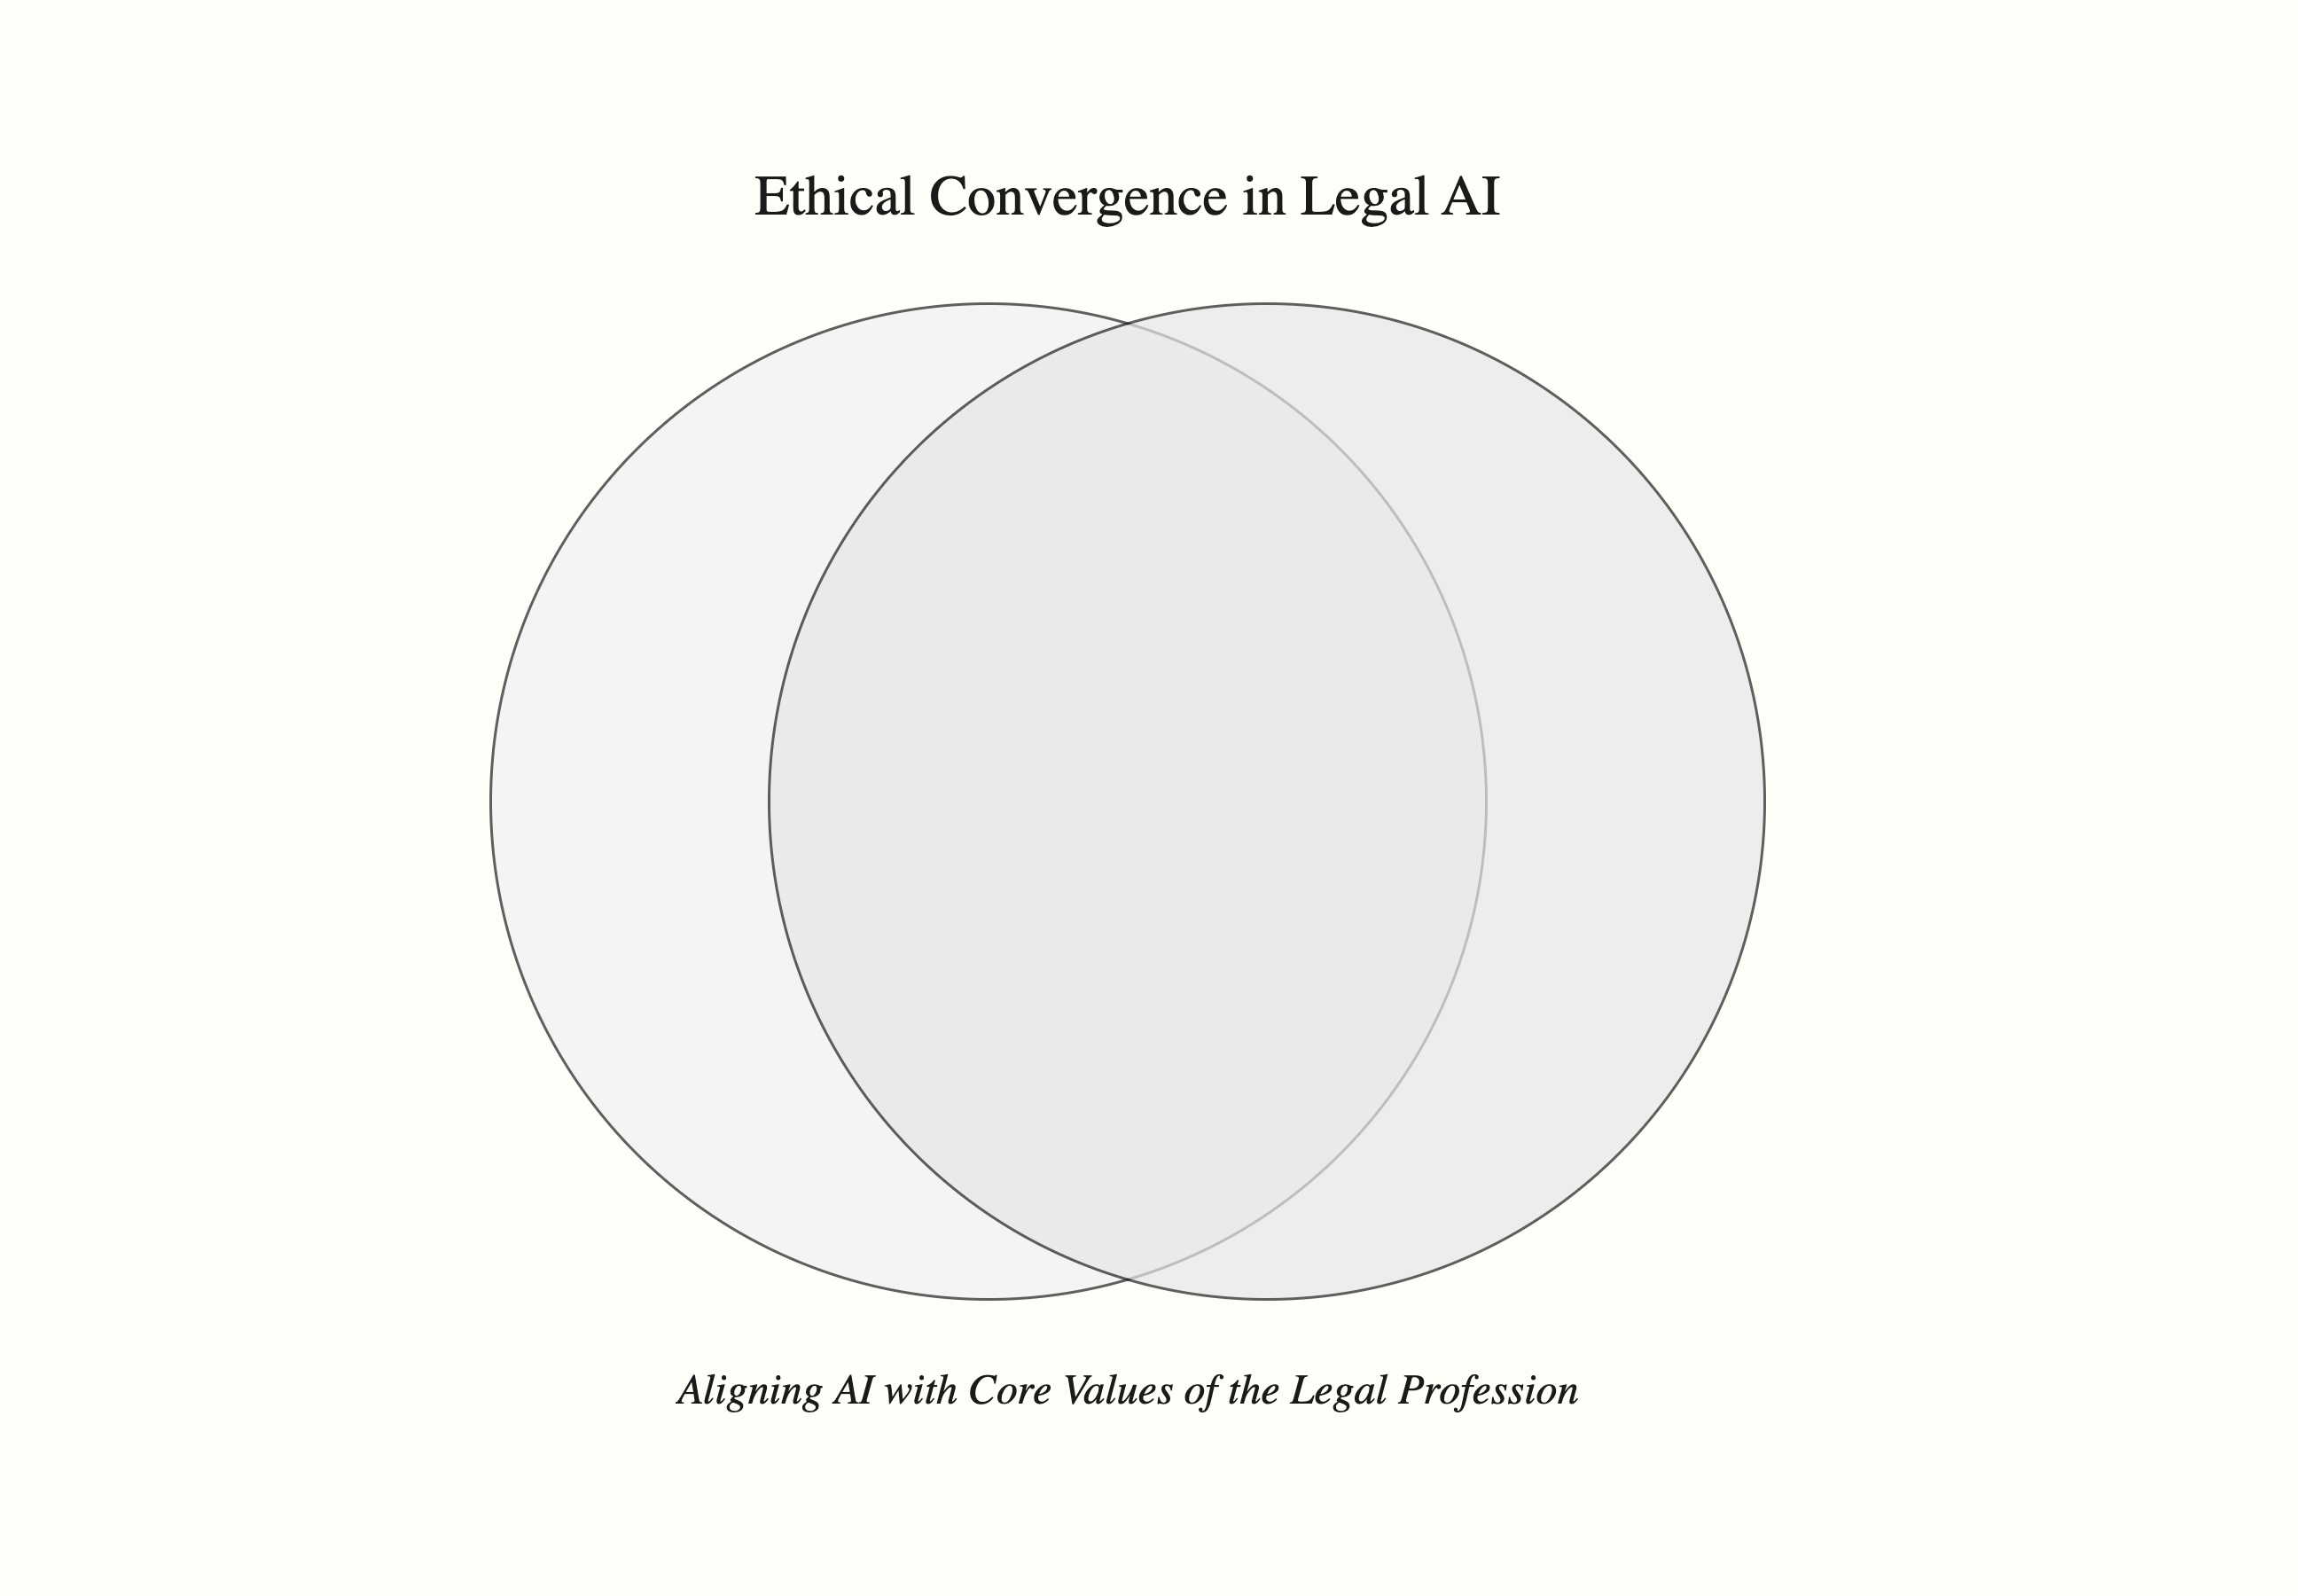 Ethics and Artificial Intelligence - Aligning the Use of AI with the Core Values of the Legal Profession